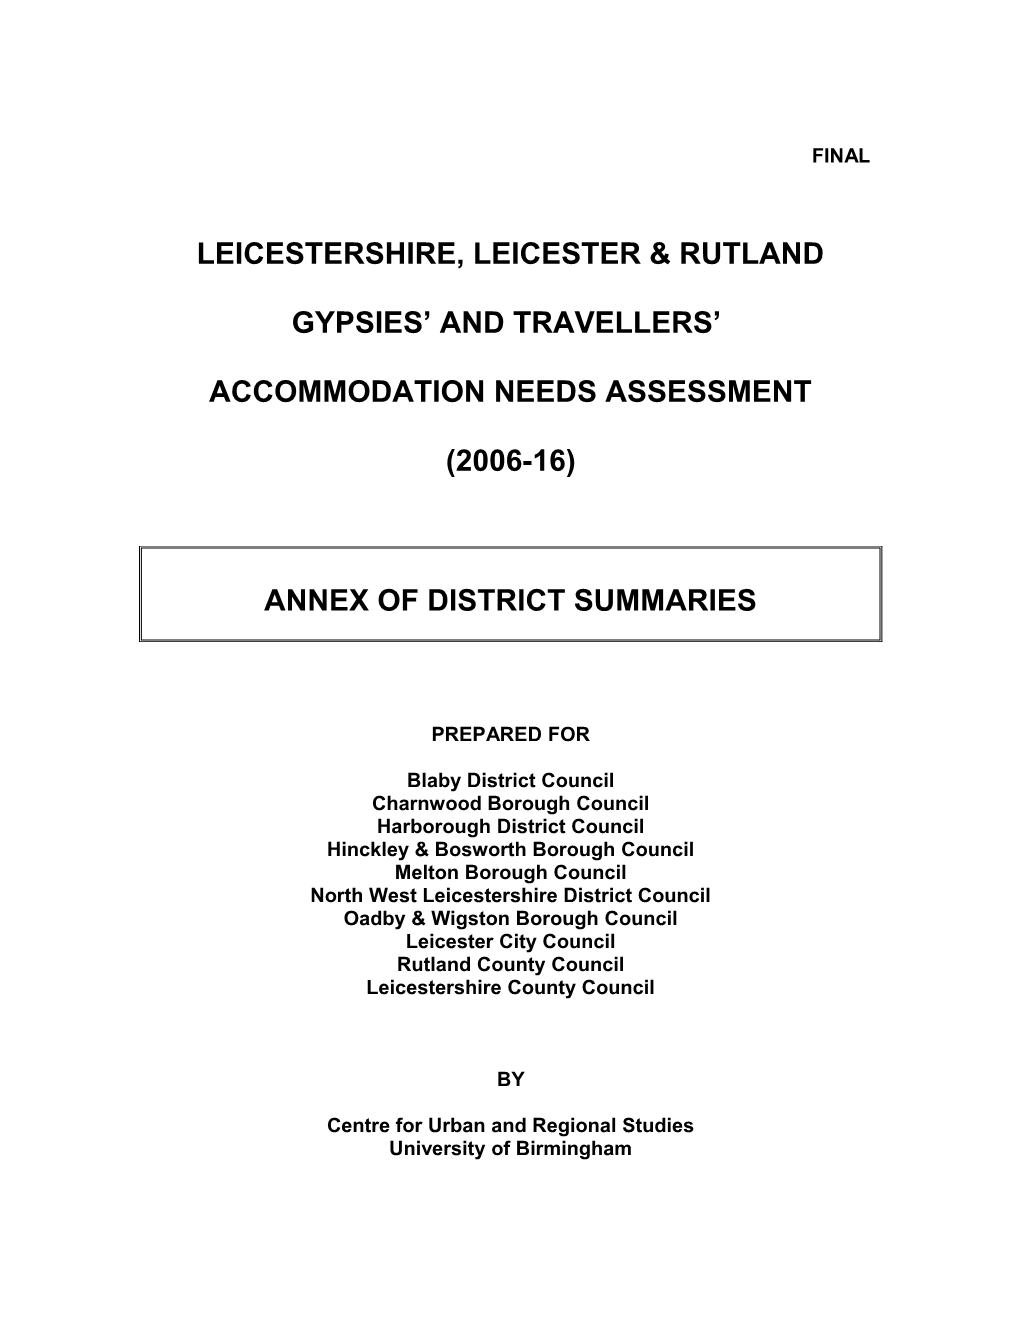 Leicestershire, Leicester & Rutland